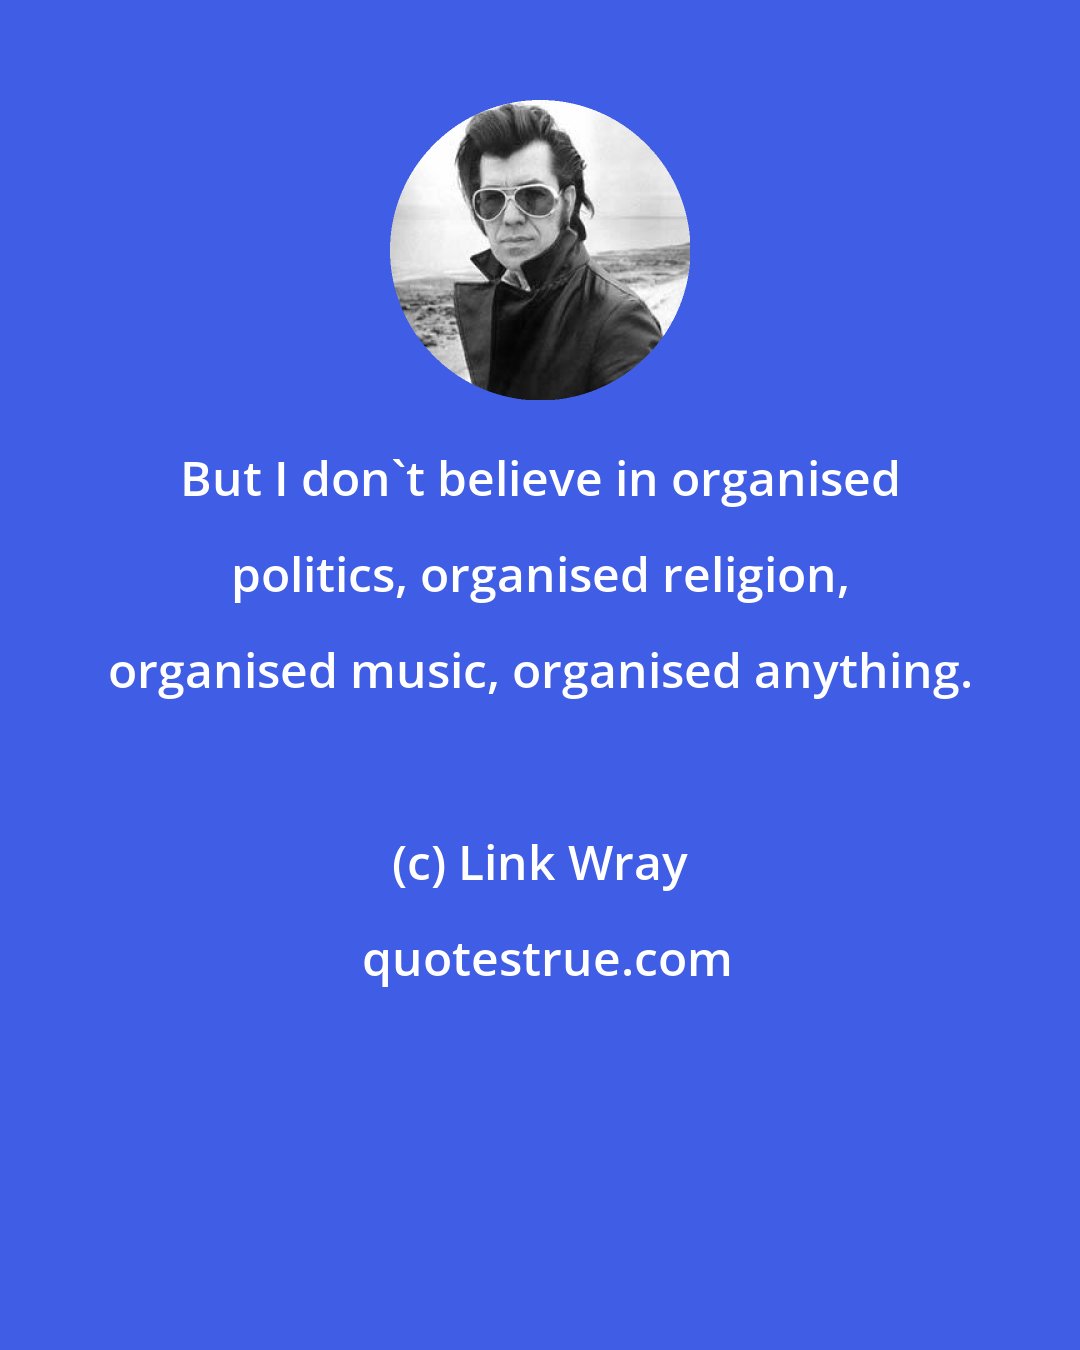 Link Wray: But I don't believe in organised politics, organised religion, organised music, organised anything.